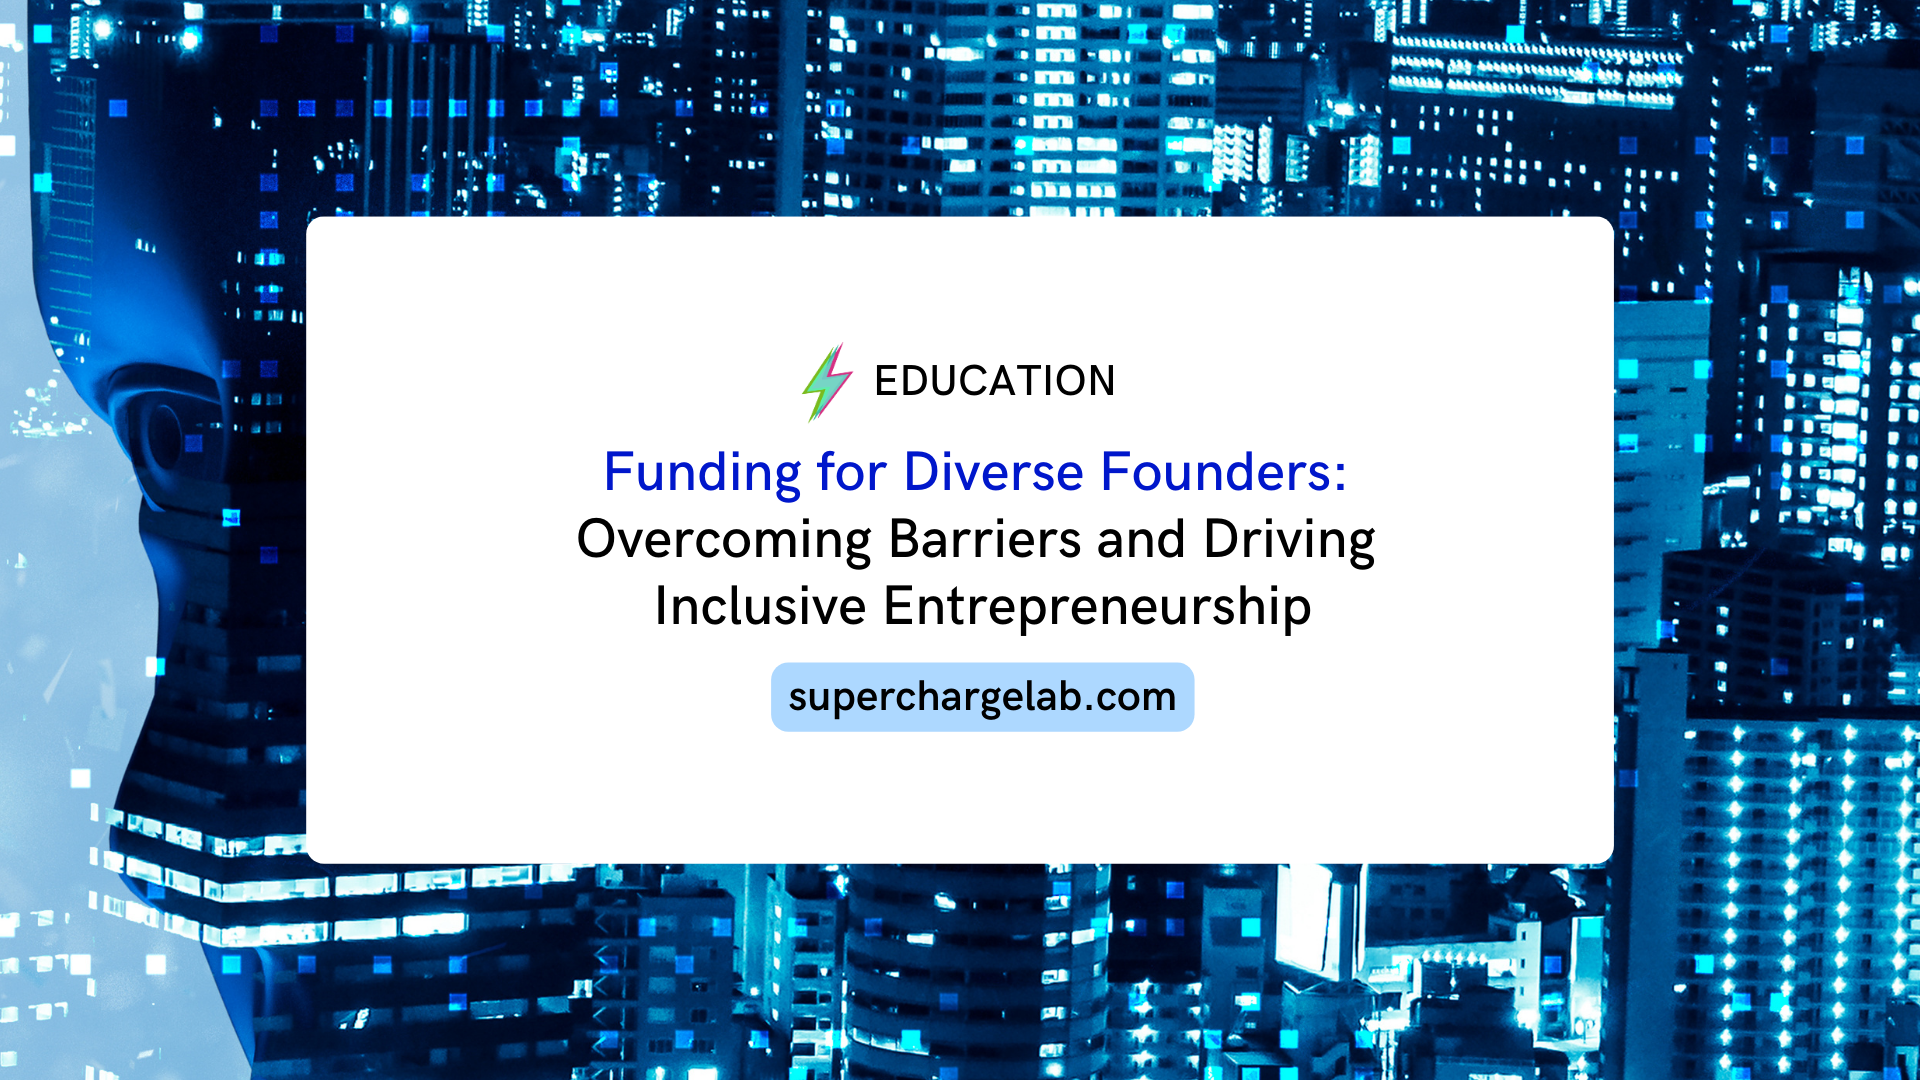 Funding for Diverse Founders: Overcoming Barriers and Driving Inclusive Entrepreneurship